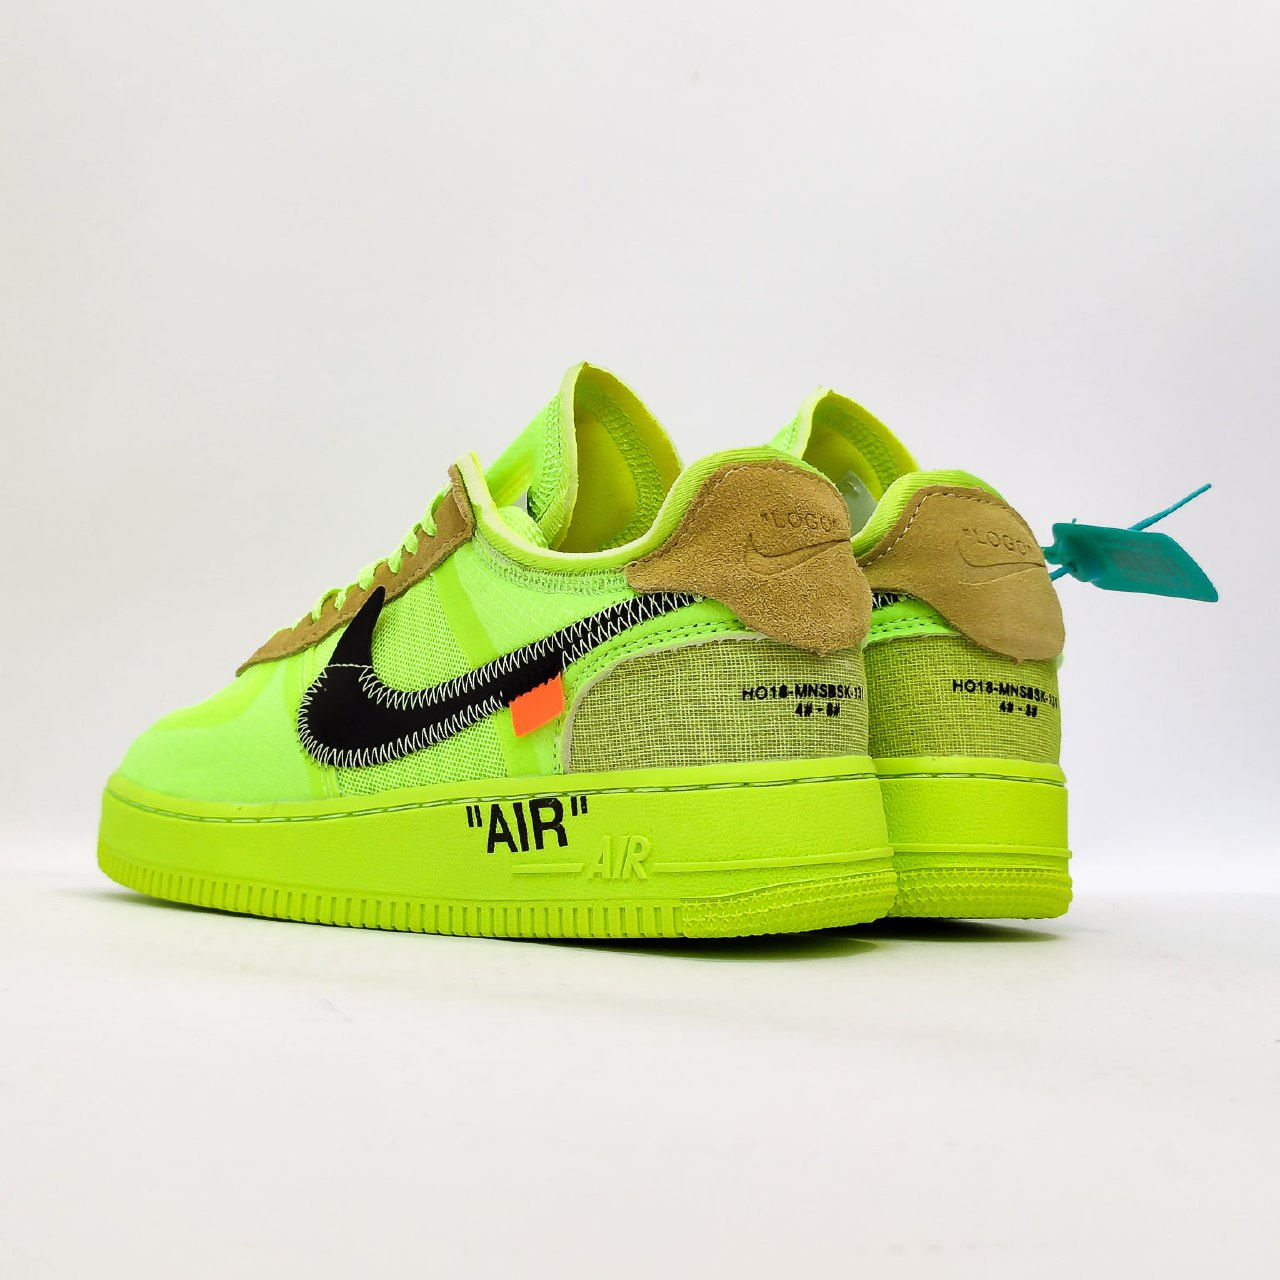 Nike X Off White - Nike Air Force 1 low Off White Volt - Catawiki